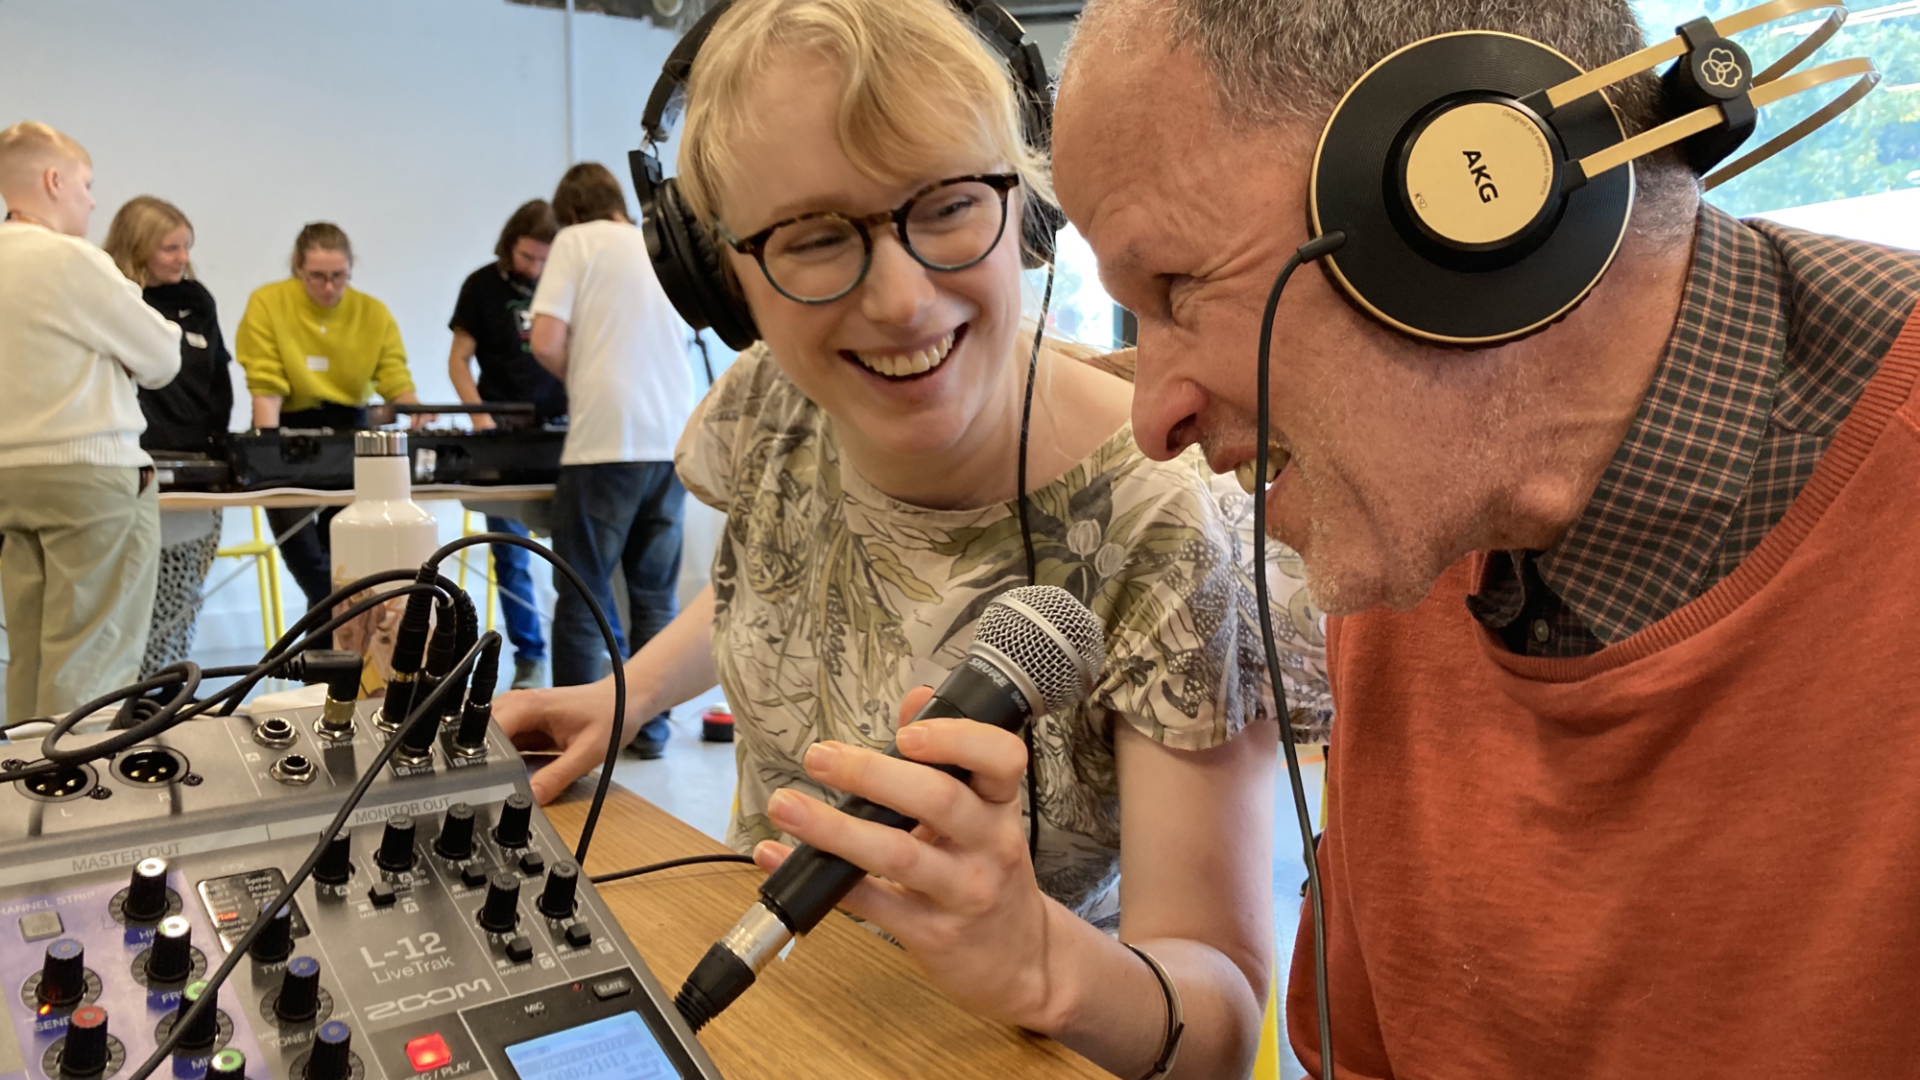 A younger and an older neighbour using recording equipment and laughing